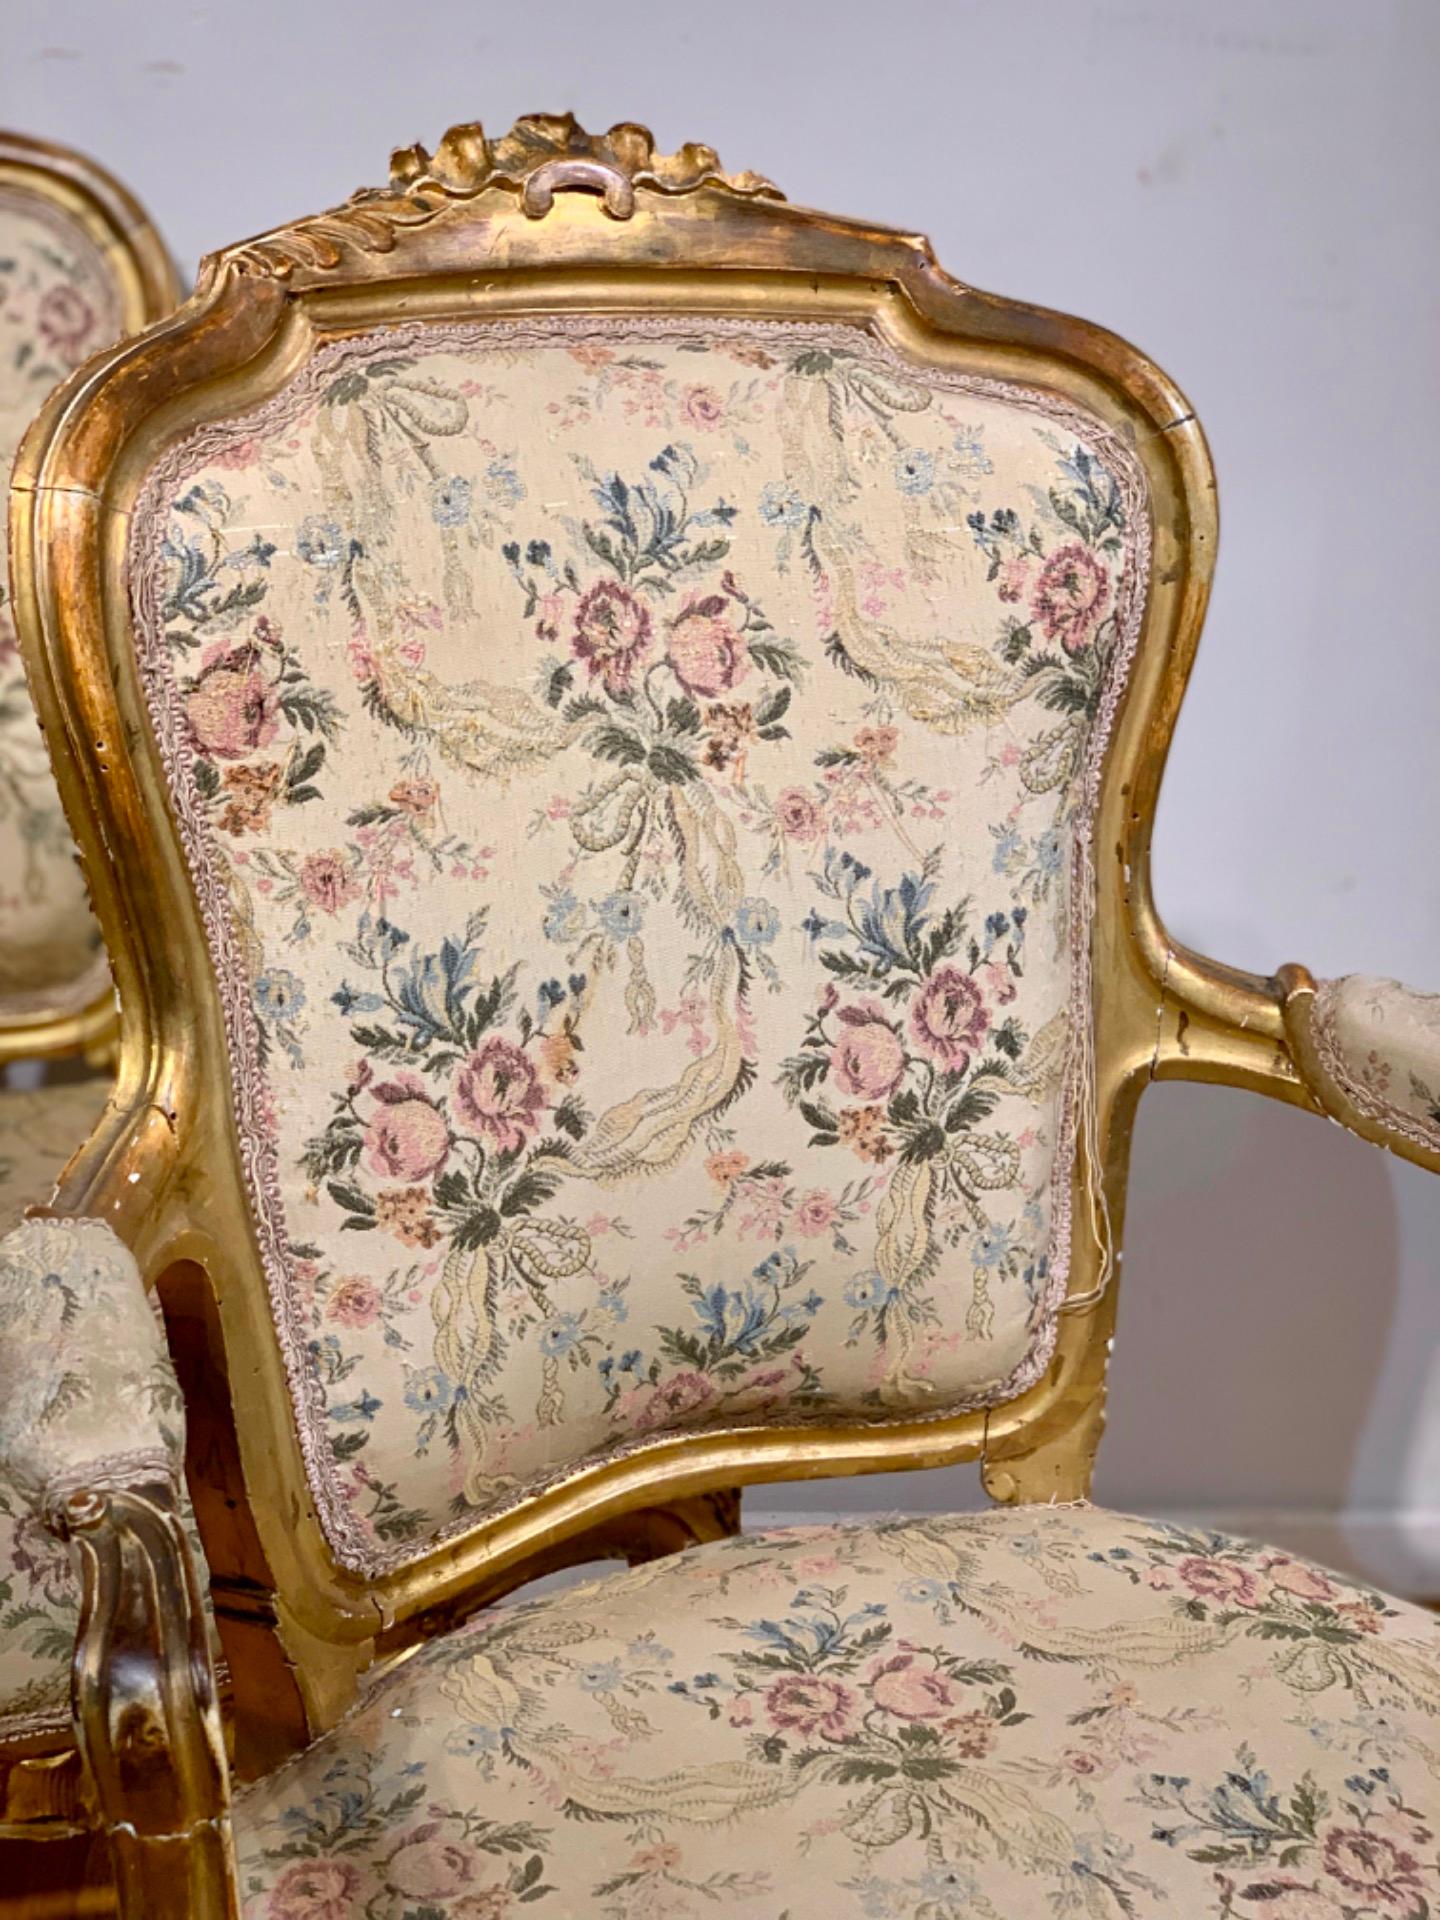 Wood 19th CENTURY PAIR OF GOLDEN ARMCHAIRS LUIS PHILIPPE